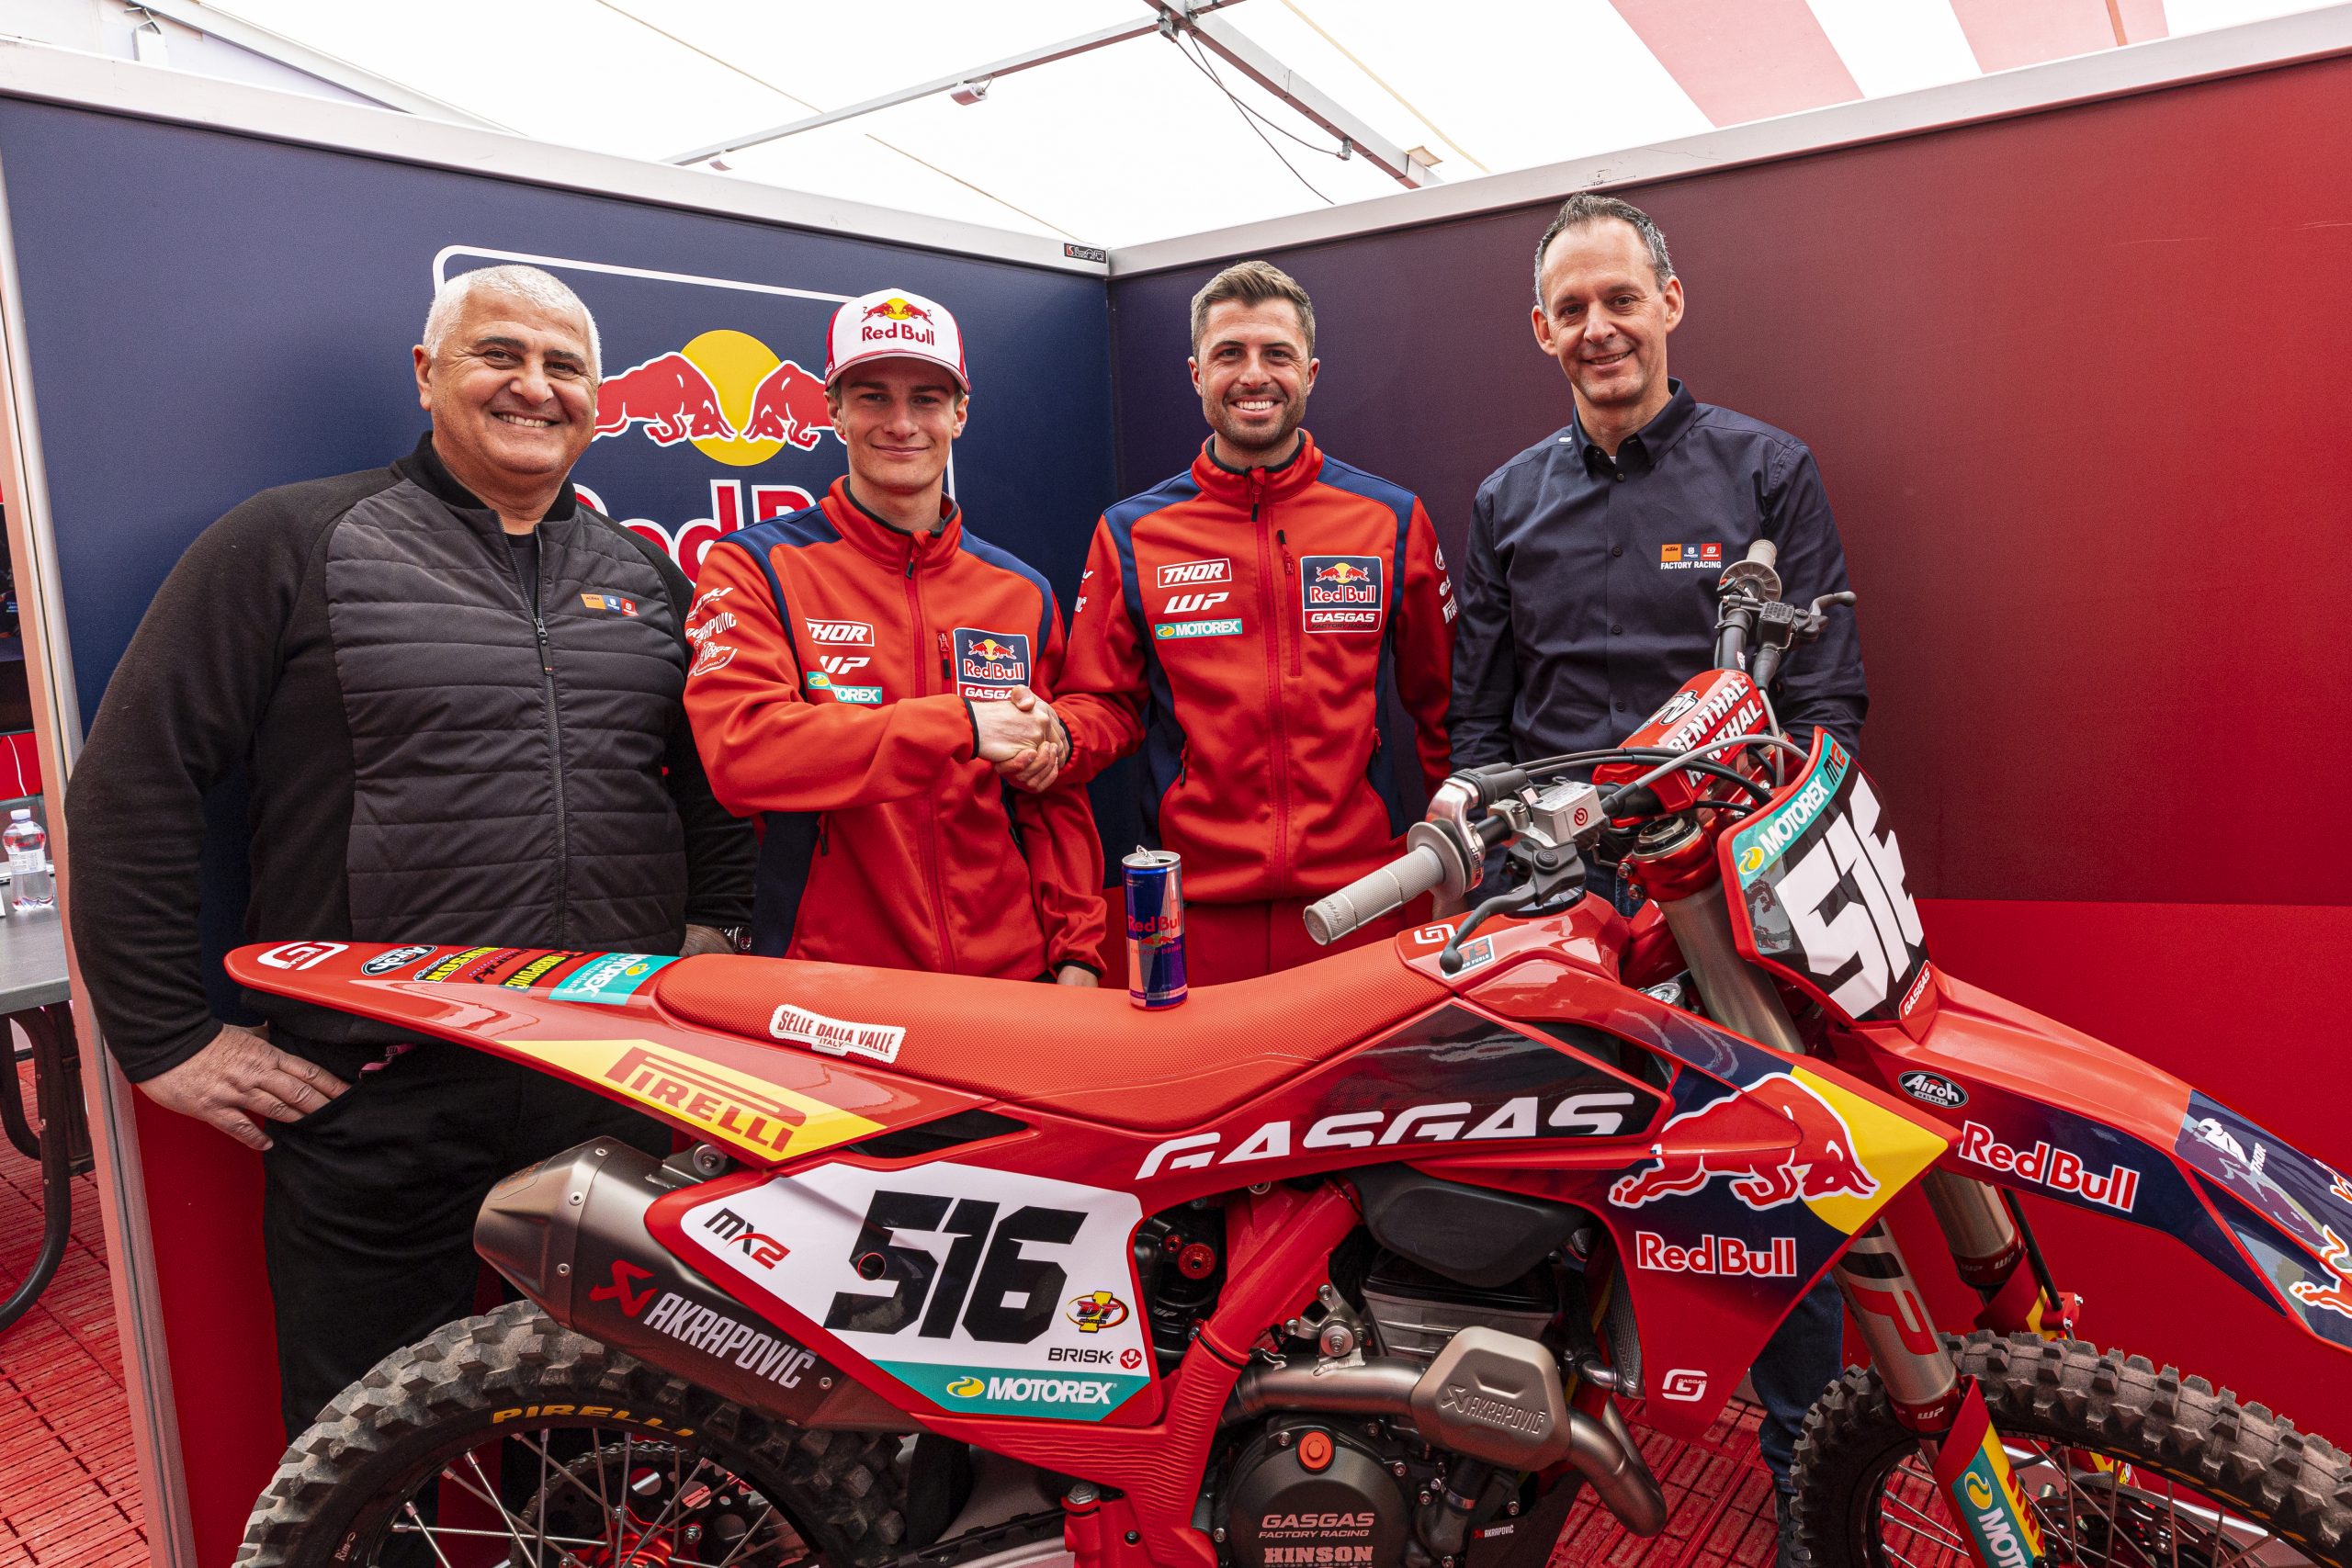 RED BULL GASGAS FACTORY RACING AND SIMON LANGENFELDER AGREE TO NEW DEAL